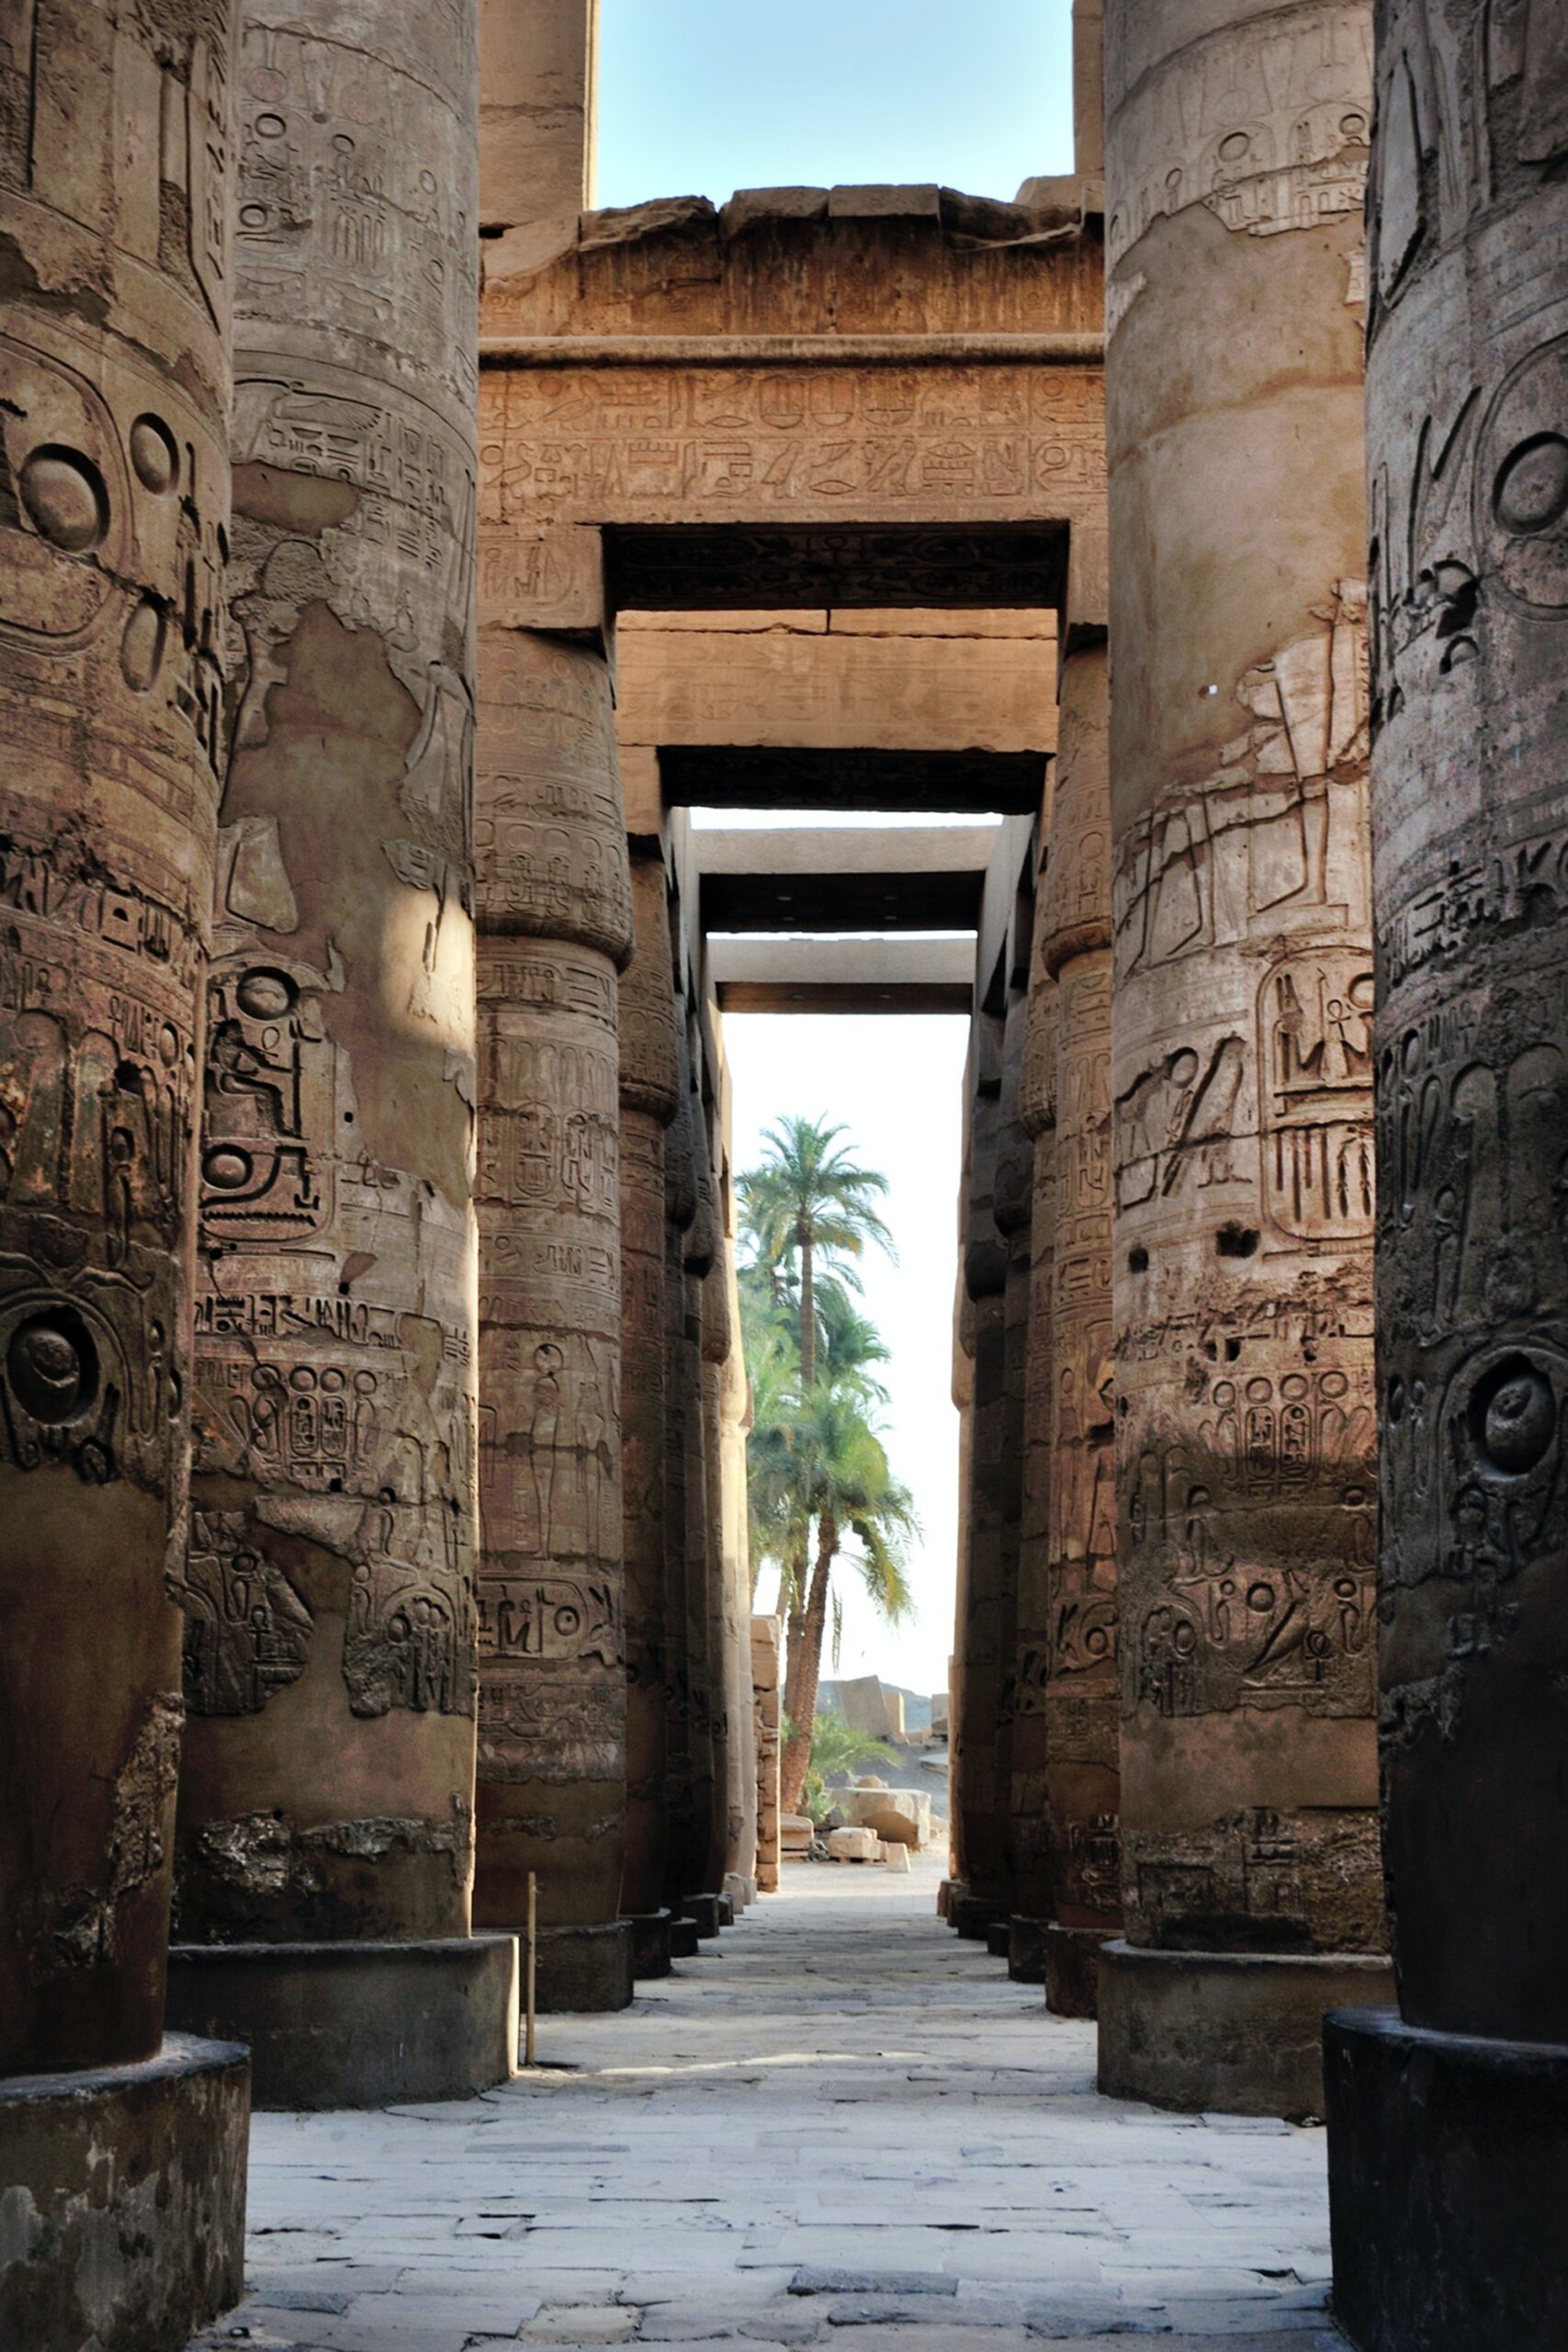 A-view-of-the-karnak-temple-showing-columns-and-palm-trees-in-the-vicinity